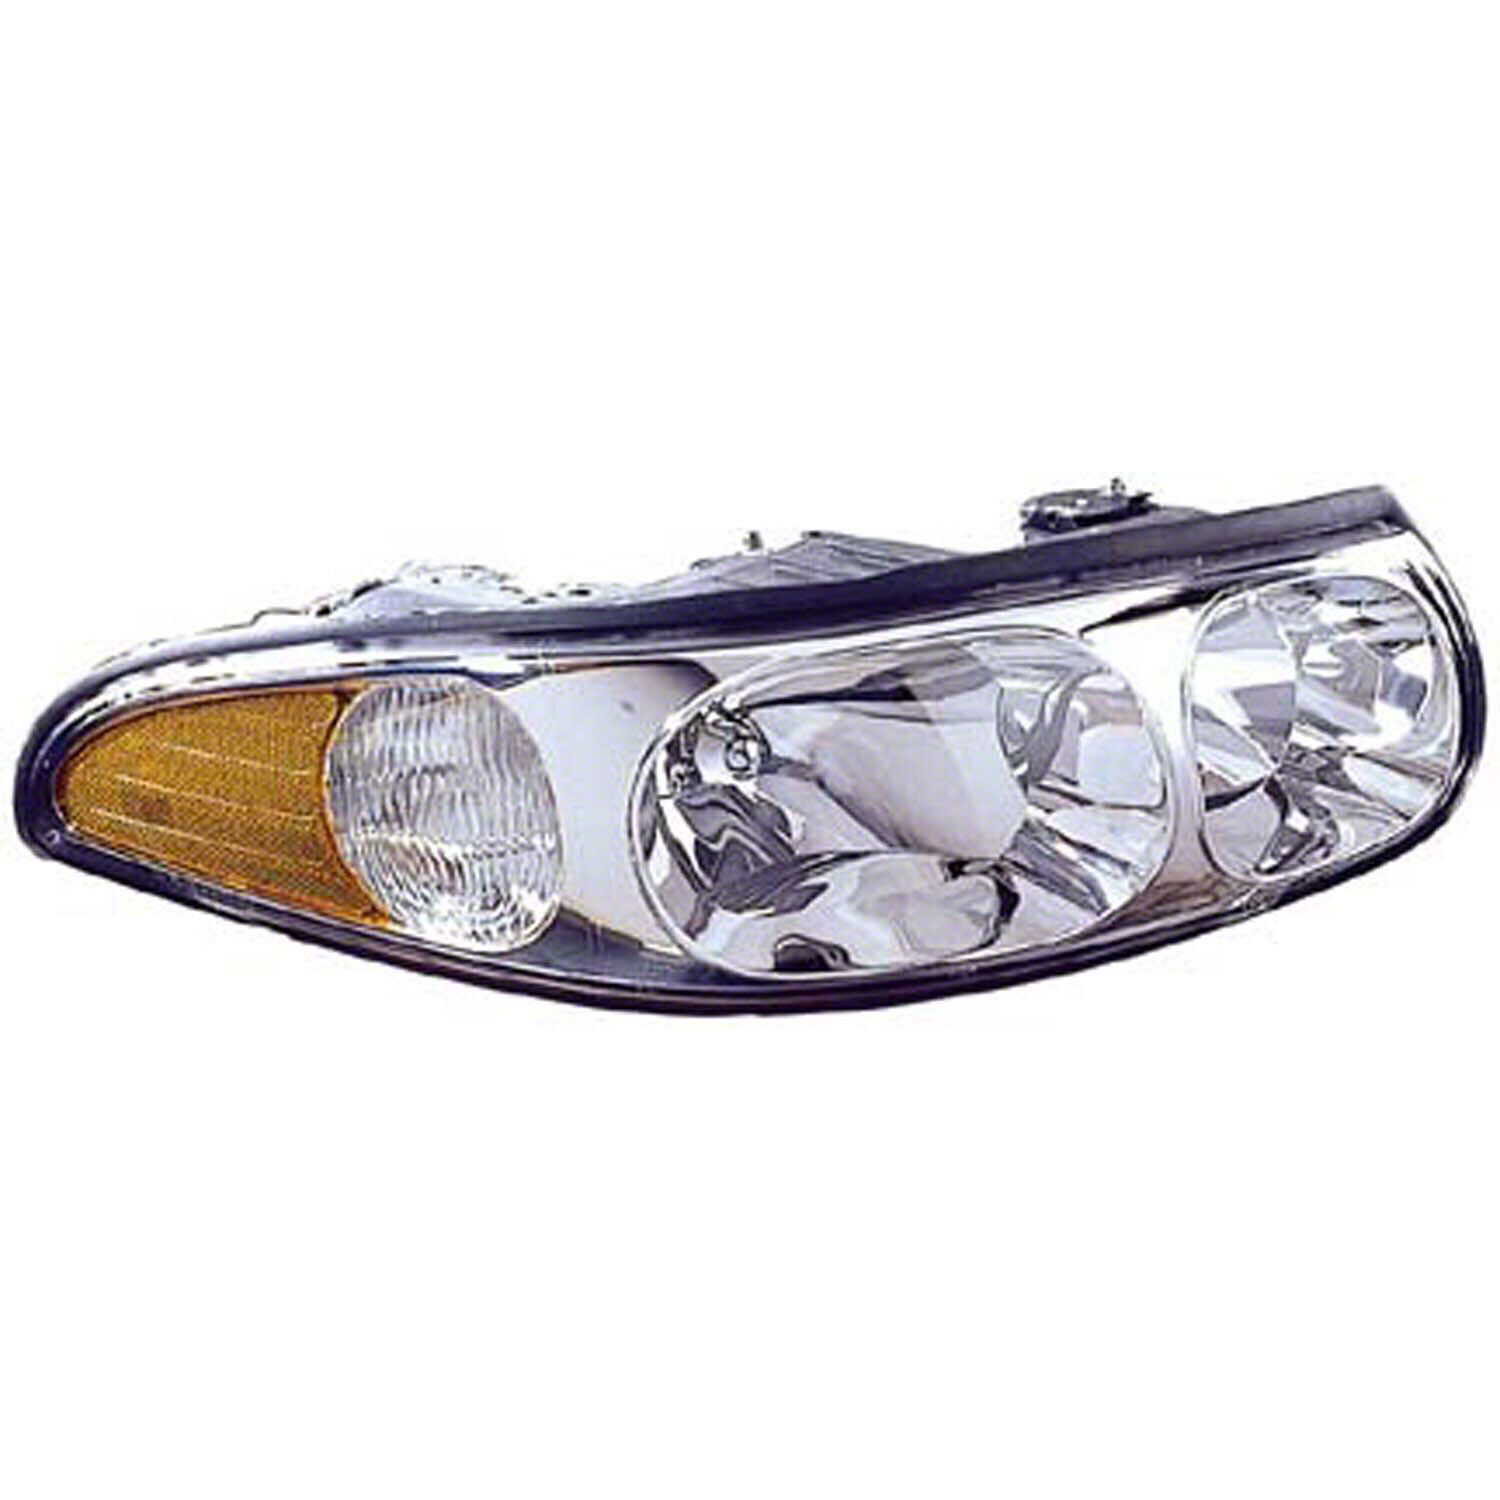 Driver Side Head Light Assembly for Buick Le Sabre 2000, 2005 GM2502204V